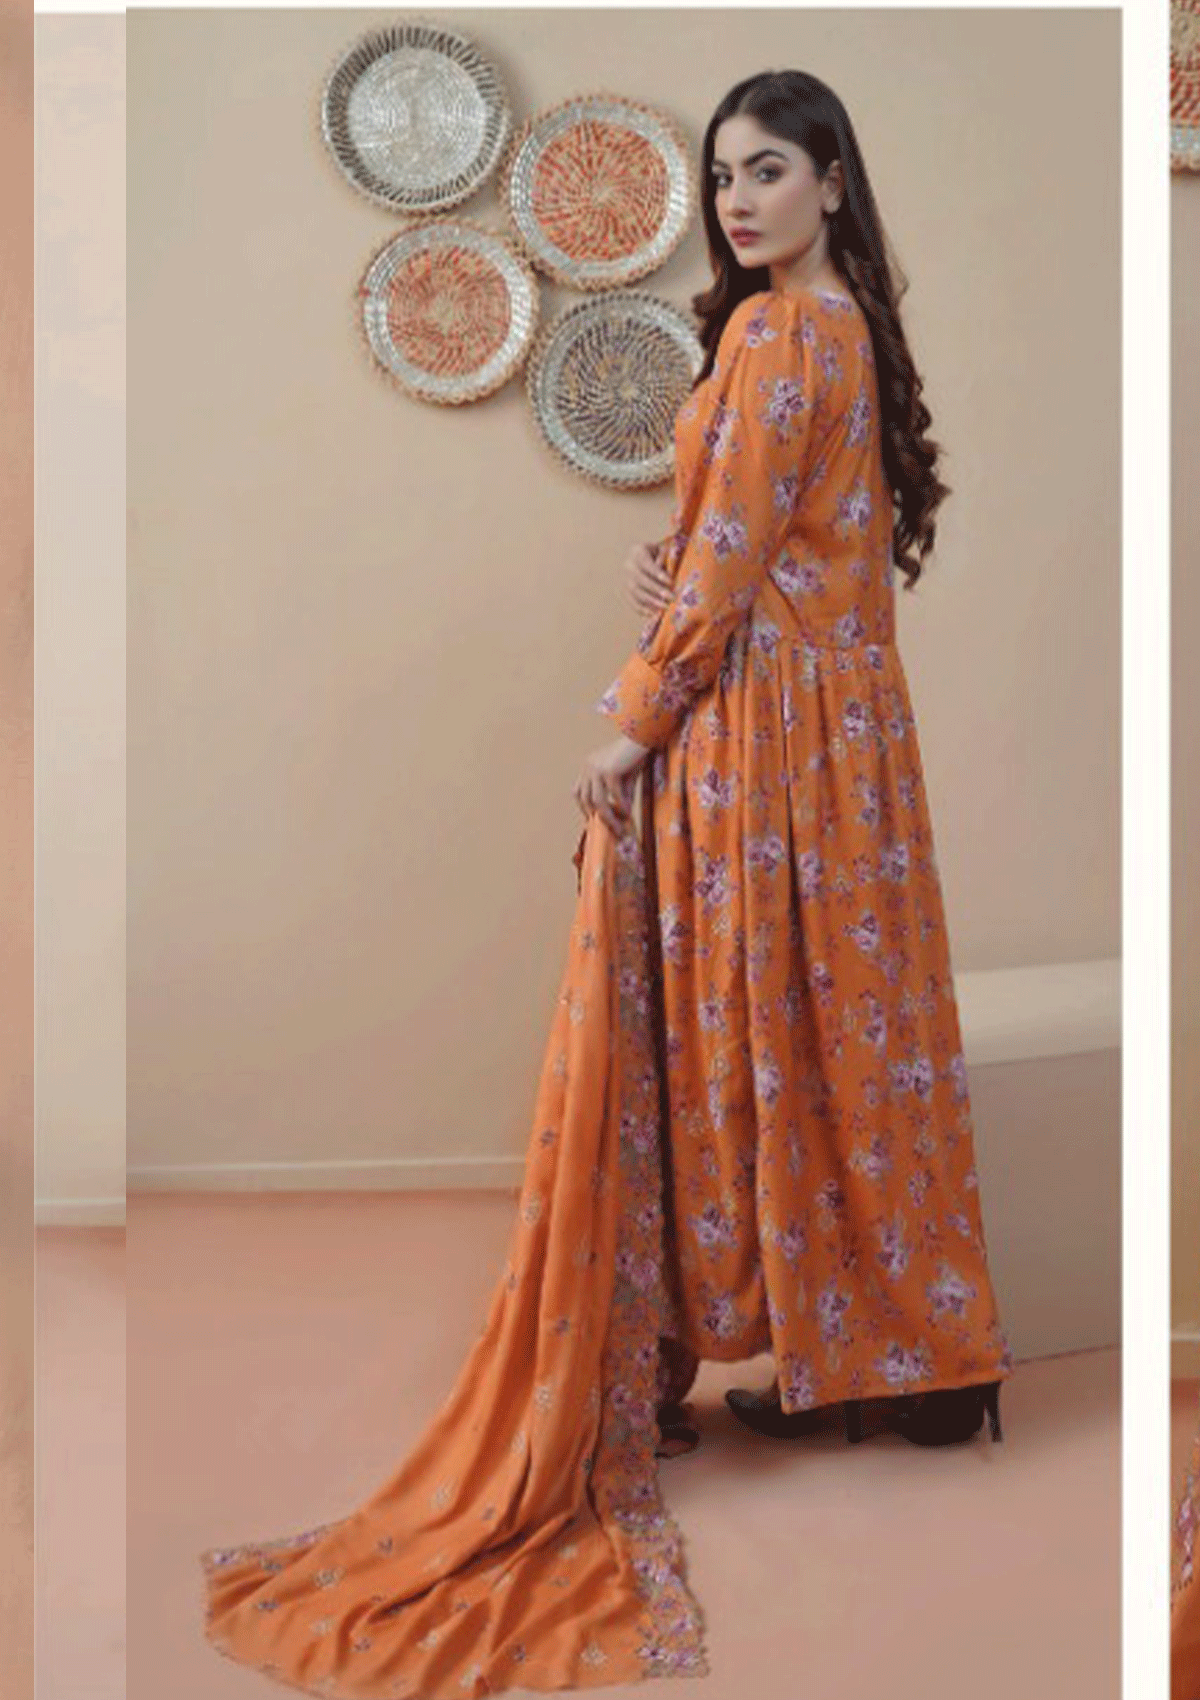 Winter Collection - Rangoli - Embroidered - REL#4 available at Saleem Fabrics Traditions